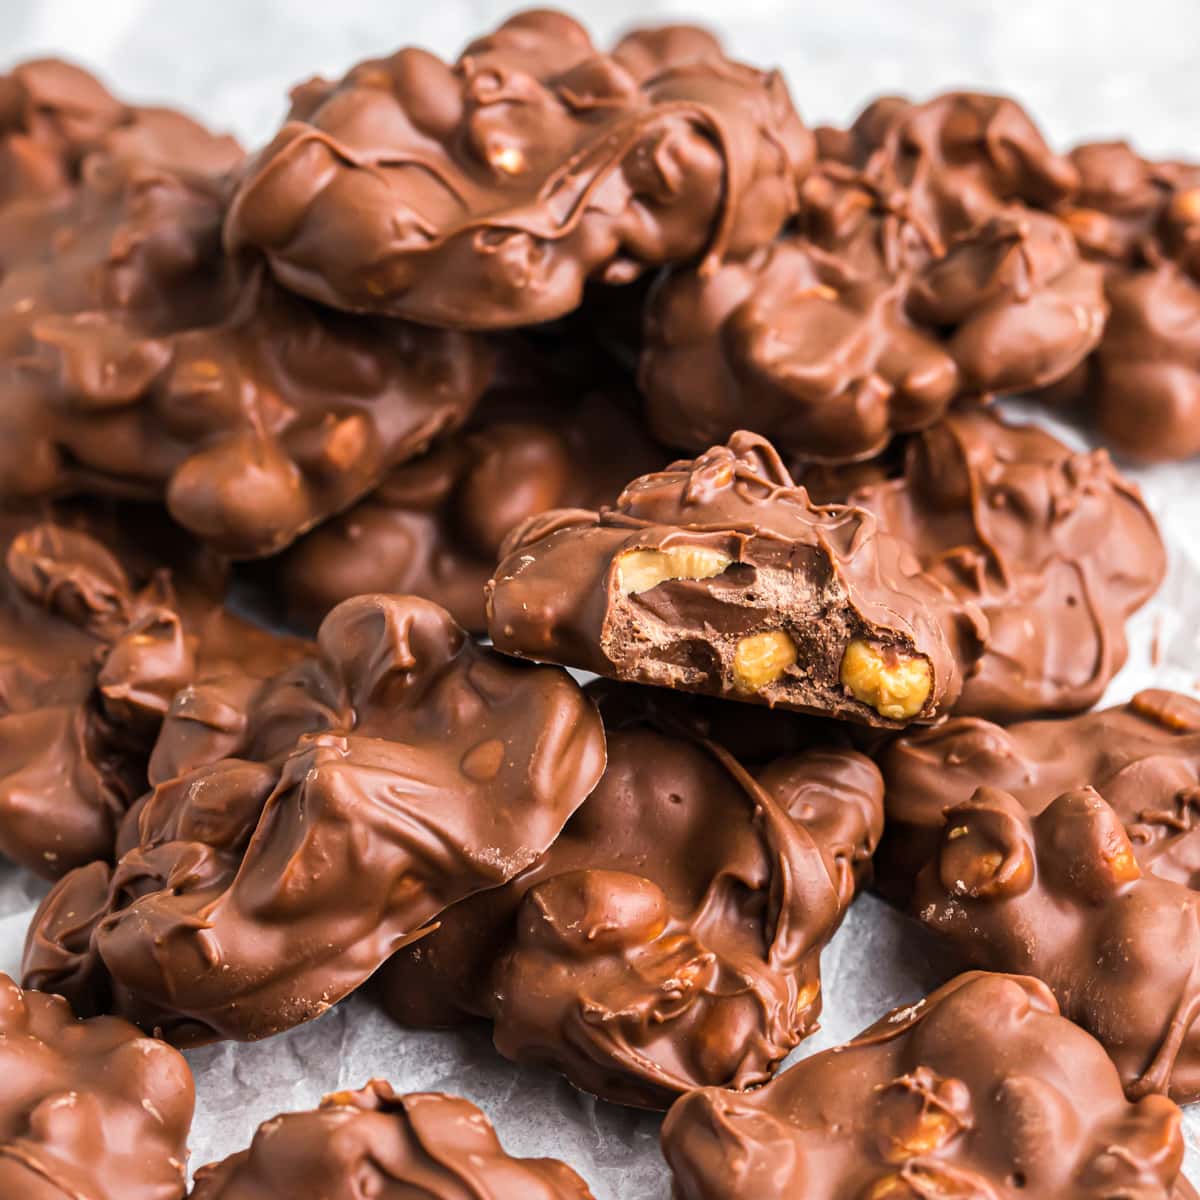 Peanut Clusters piled on wax paper.